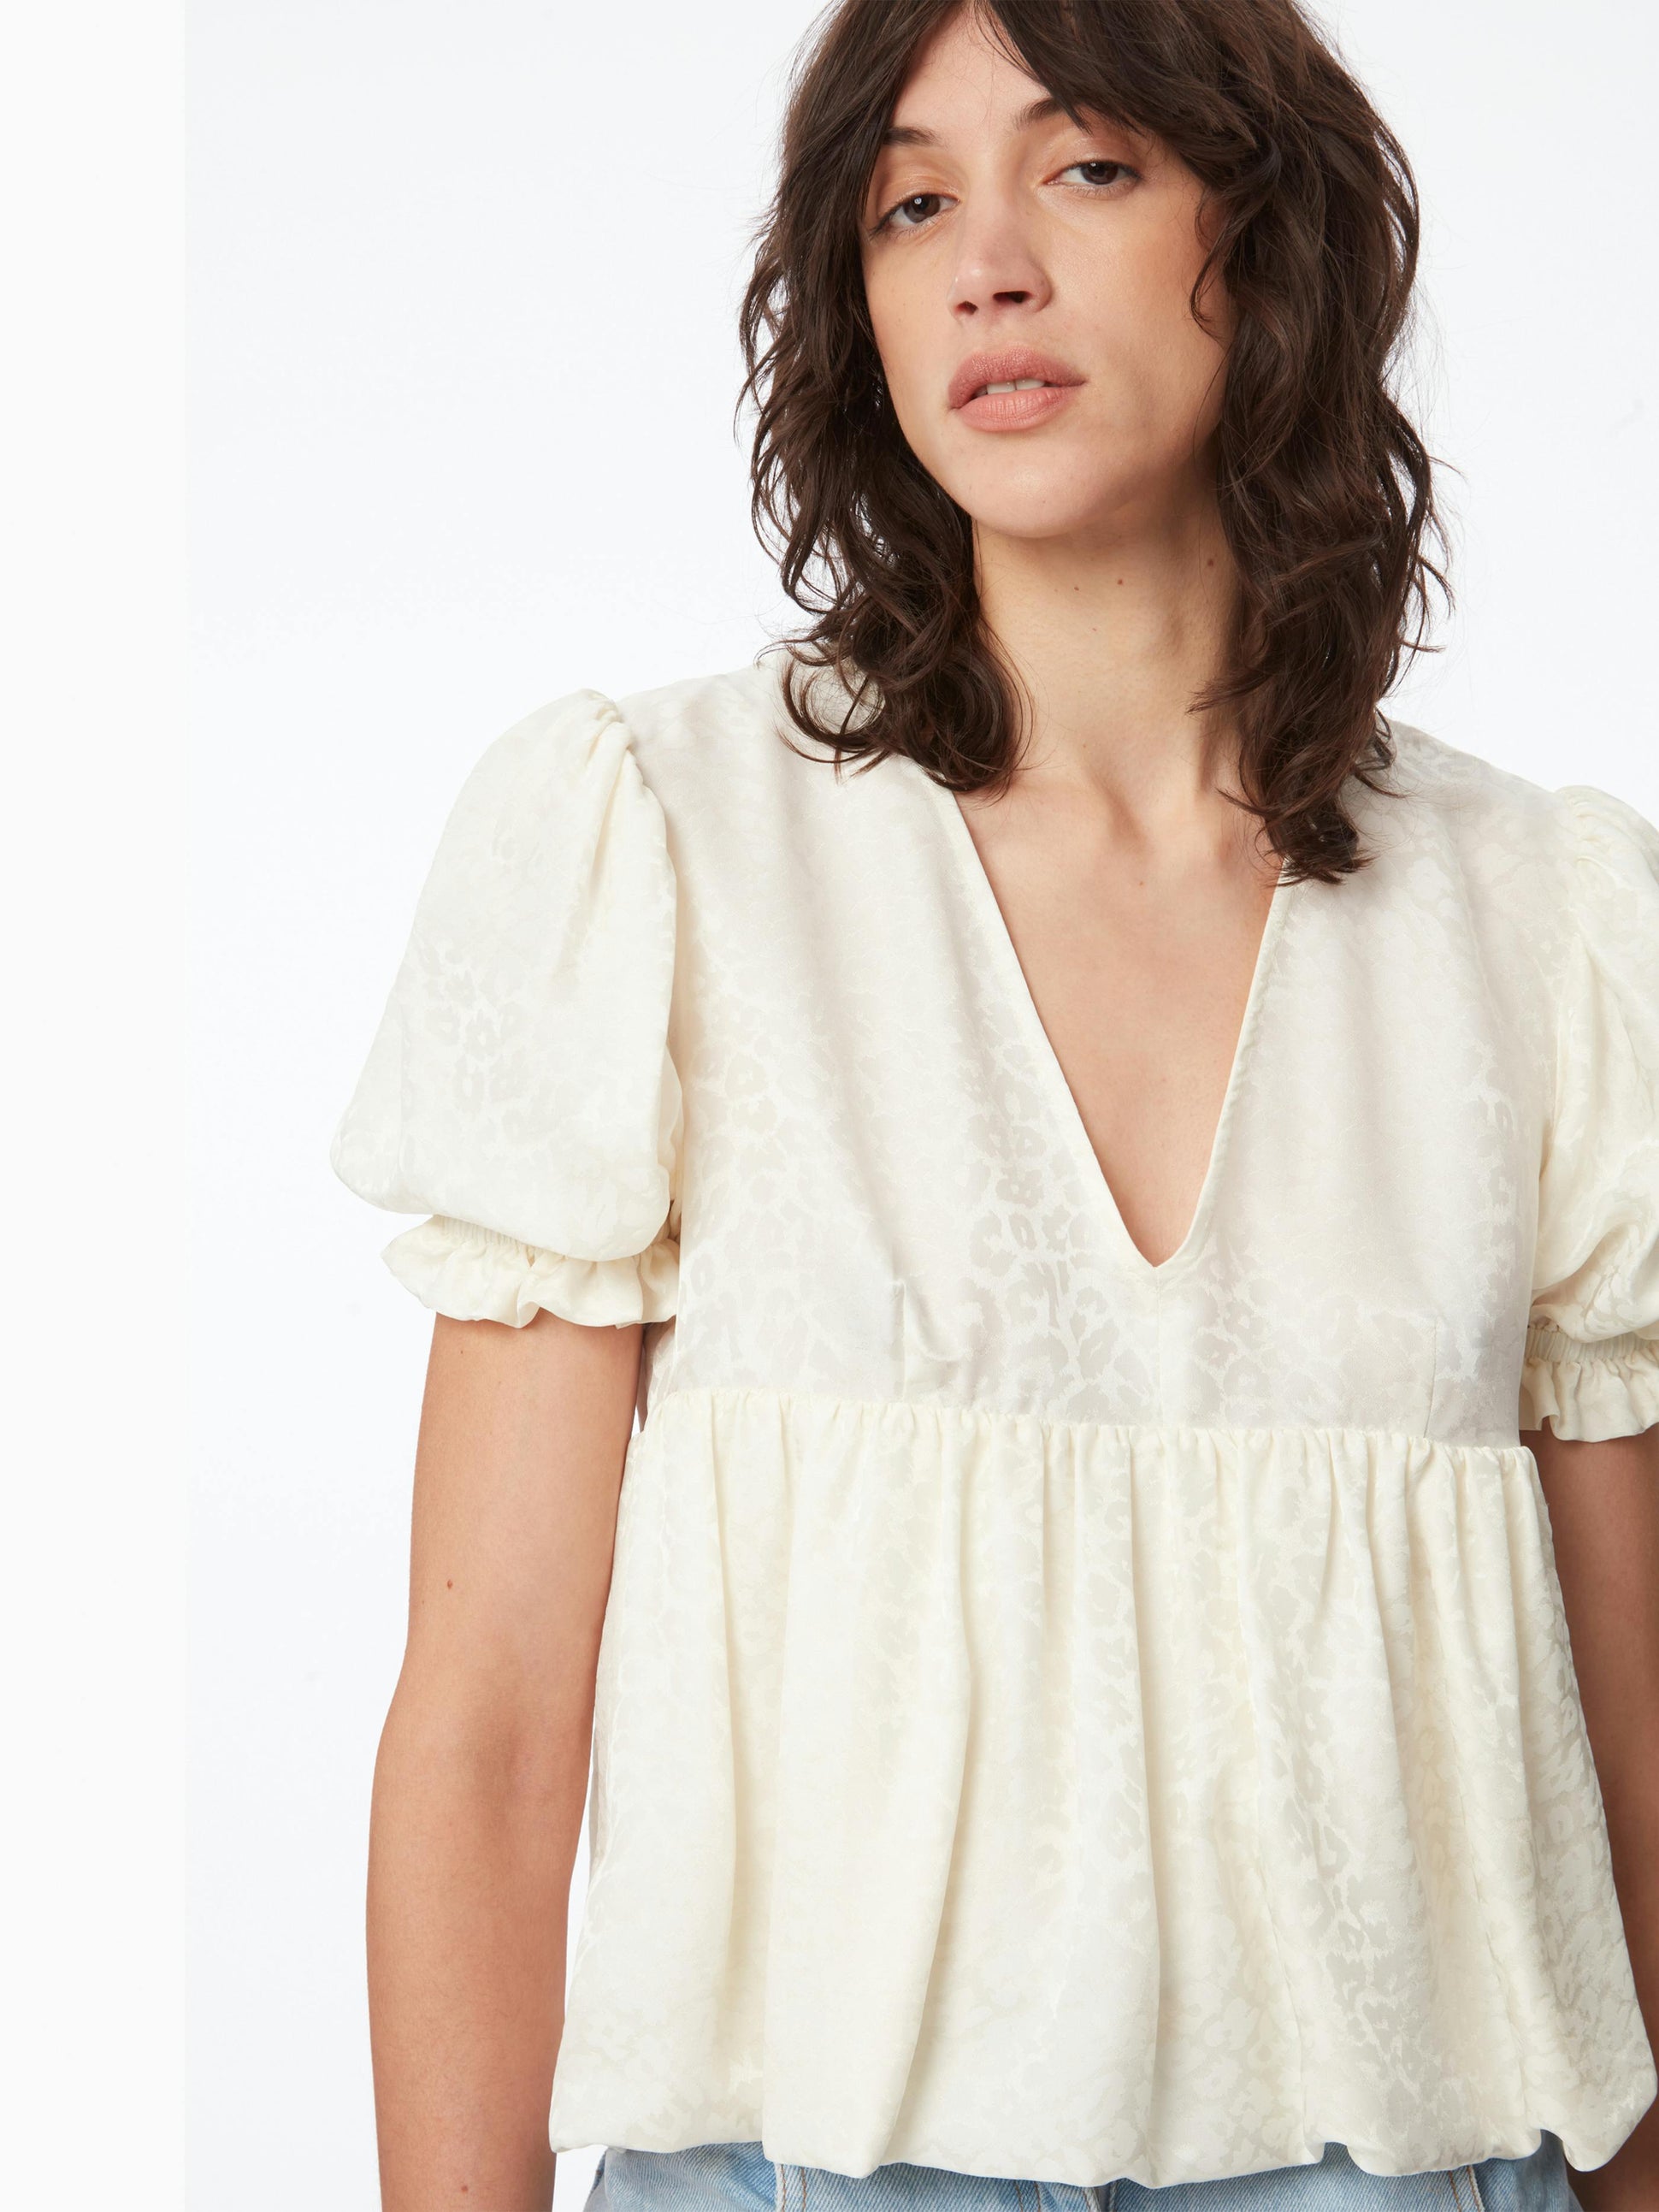 Babydoll top with ruched sleeves in creme - Nina Ricci